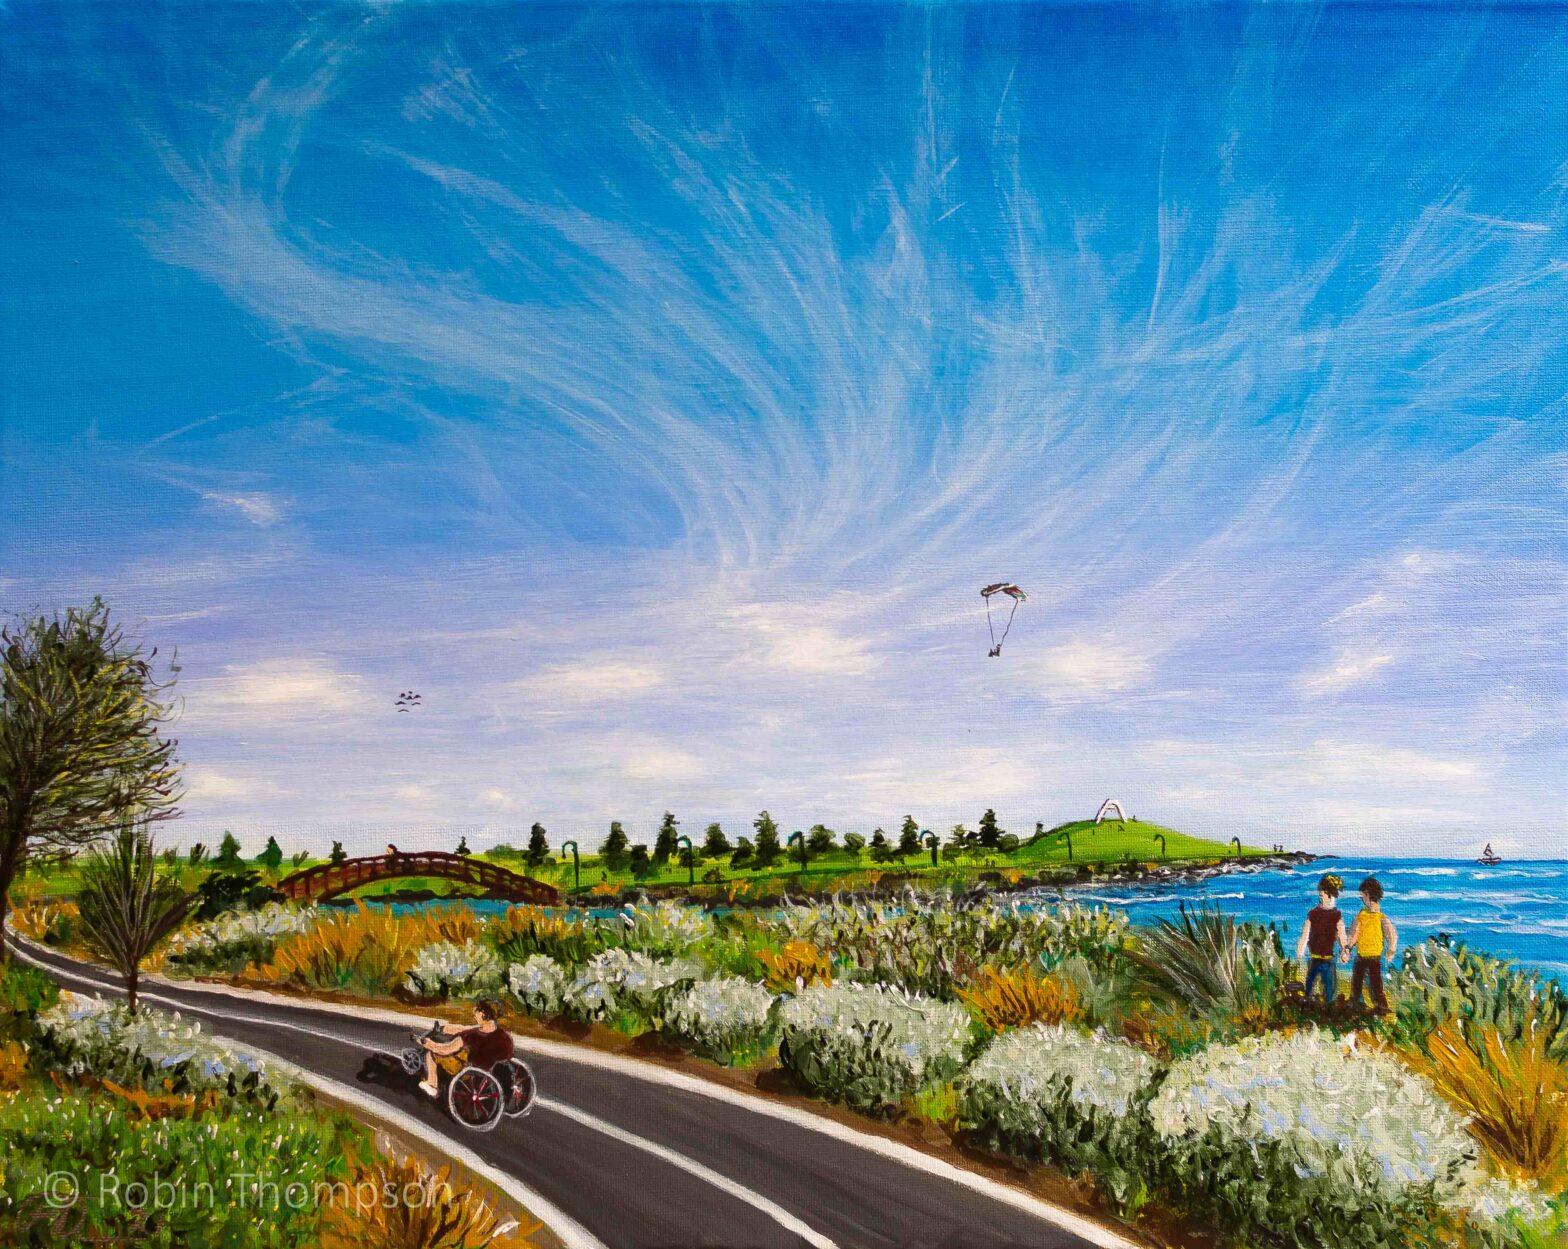 Acrylic landscape painting of the bay, showing a bright blue sky with lush green vegetation.